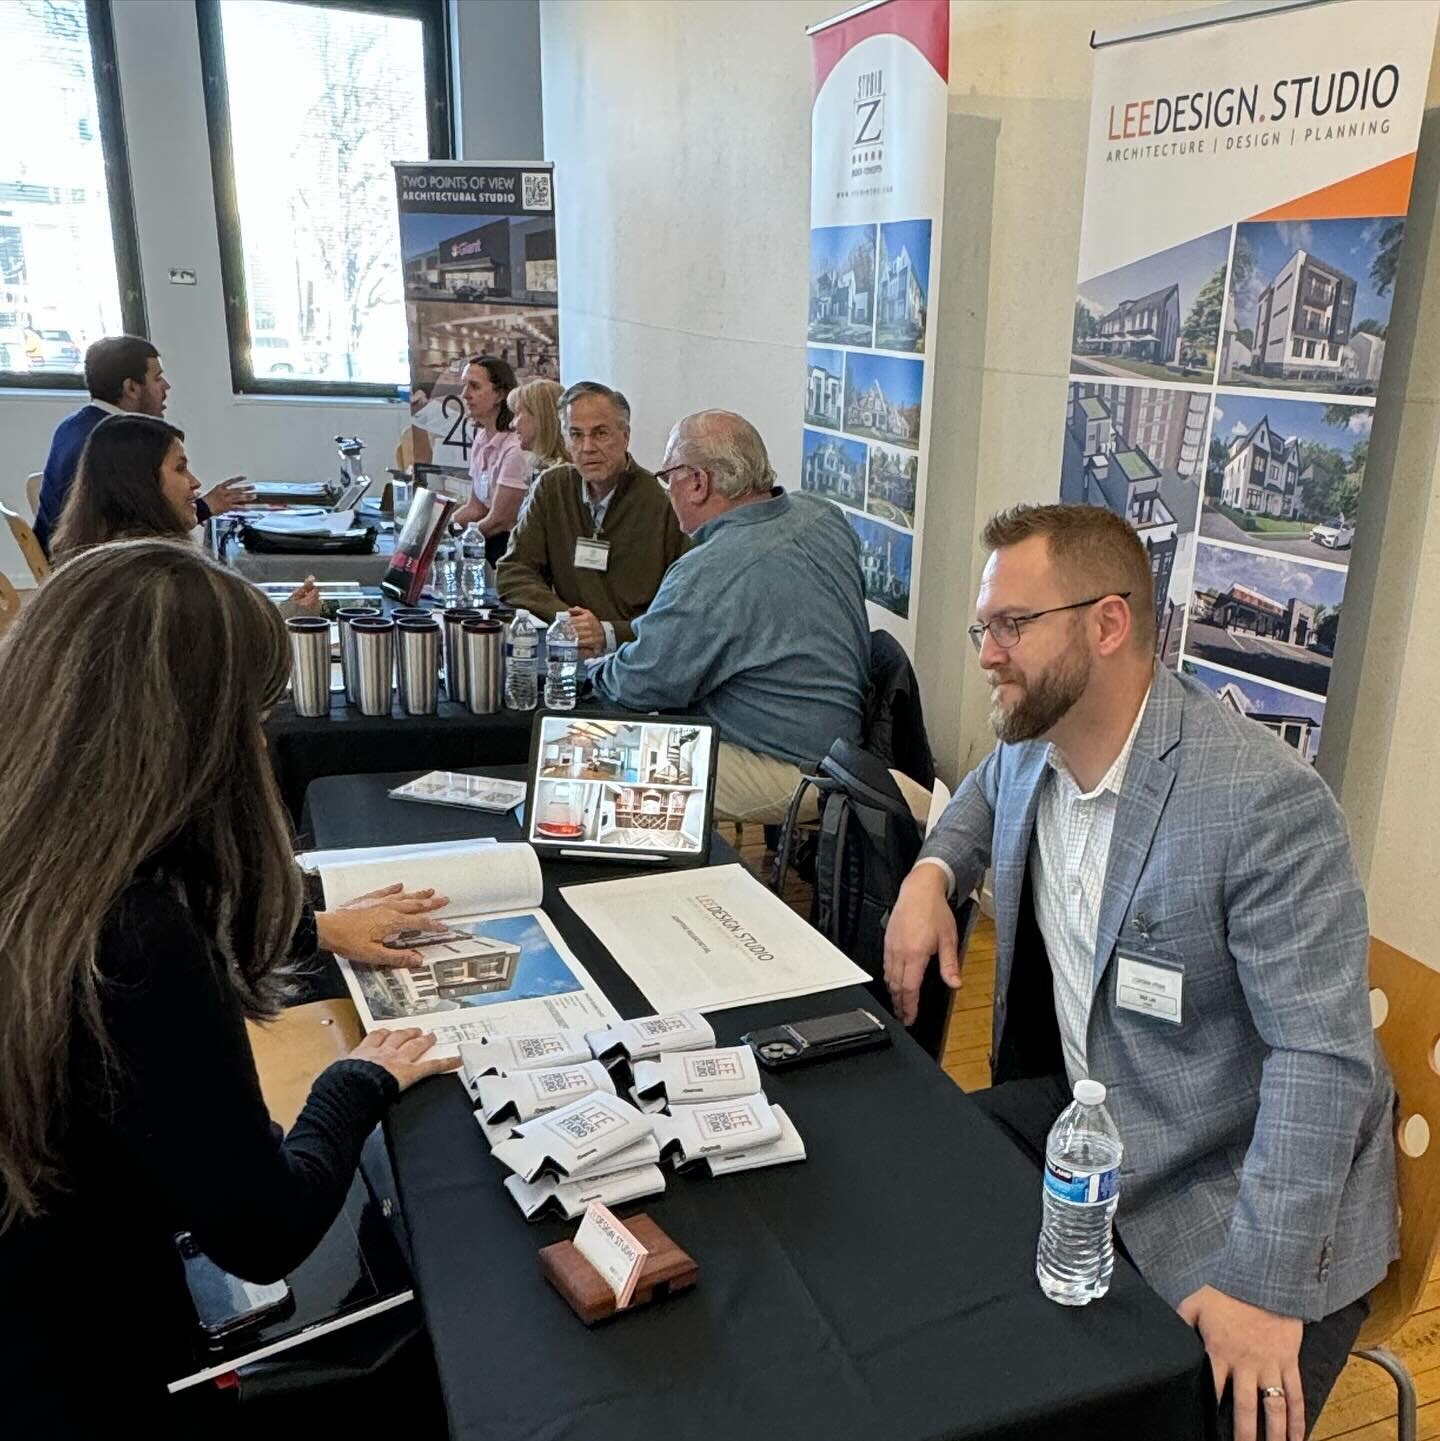 @aiaswaac Architecture &amp; Urban Design Career Fair at @vt_waac
.
.
.
.
Last week, our Founding Principal Matt Lee participated in Virginia Tech&rsquo;s Washington Alexandria Architecture Center (WAAC) Career Day in Old Town Alexandria. WAAC focuse